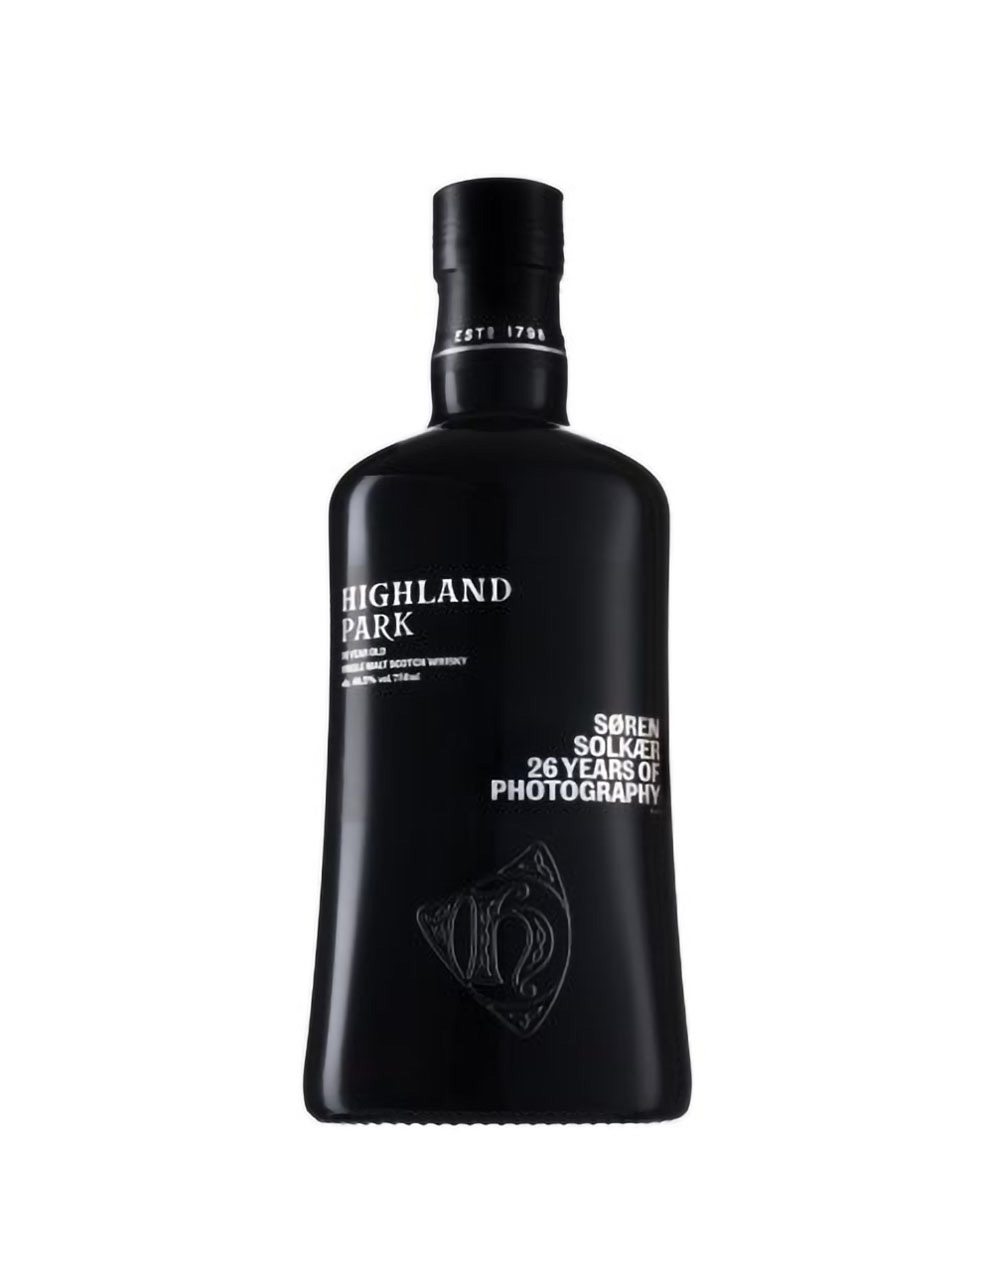 John Walker & Sons Private Collection 2015 Edition Blended Scotch Whisky